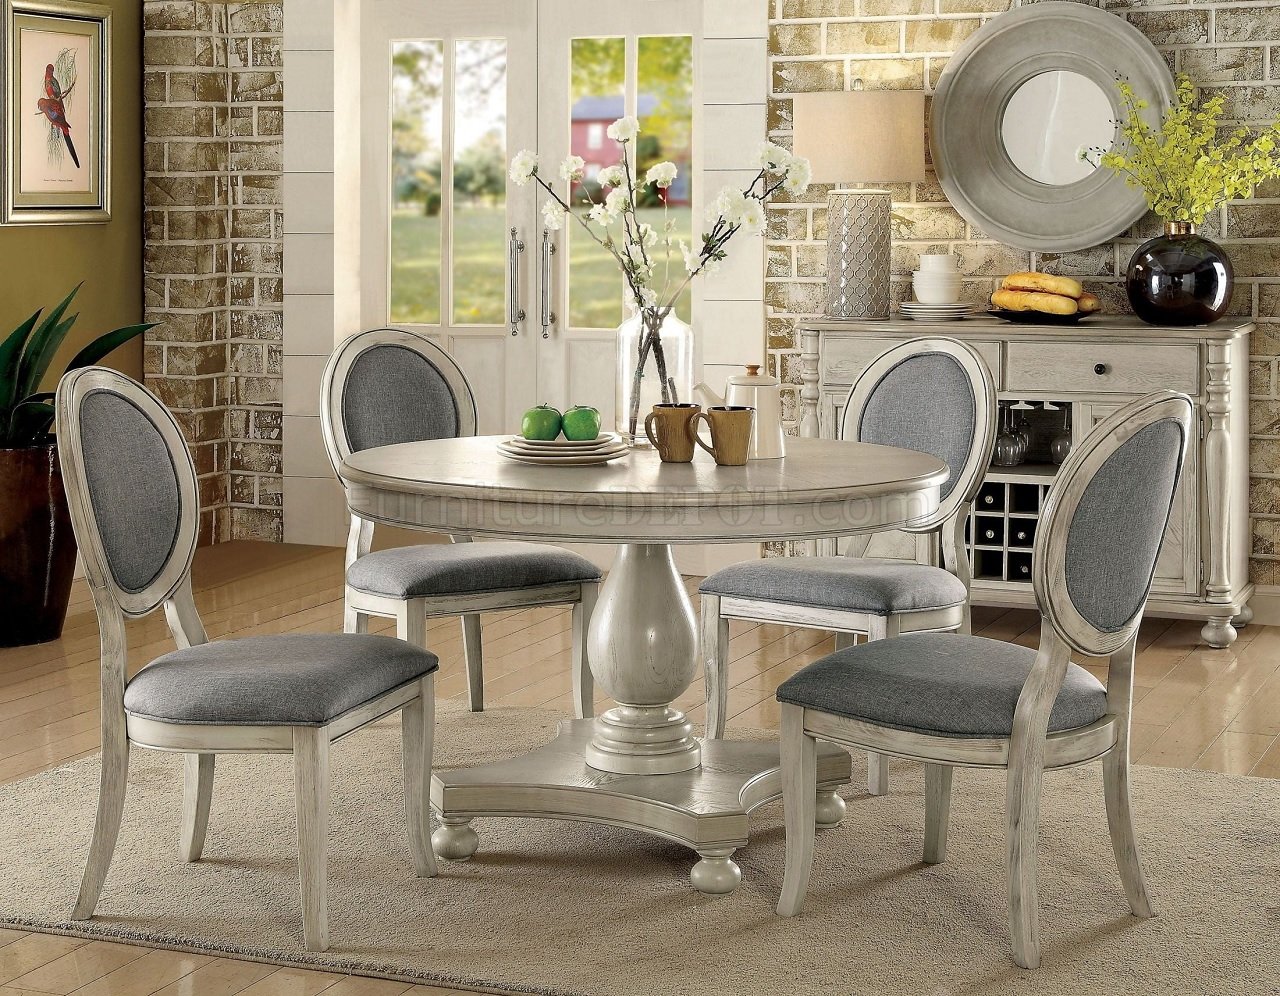 Round Dining Room Chairs For Sale